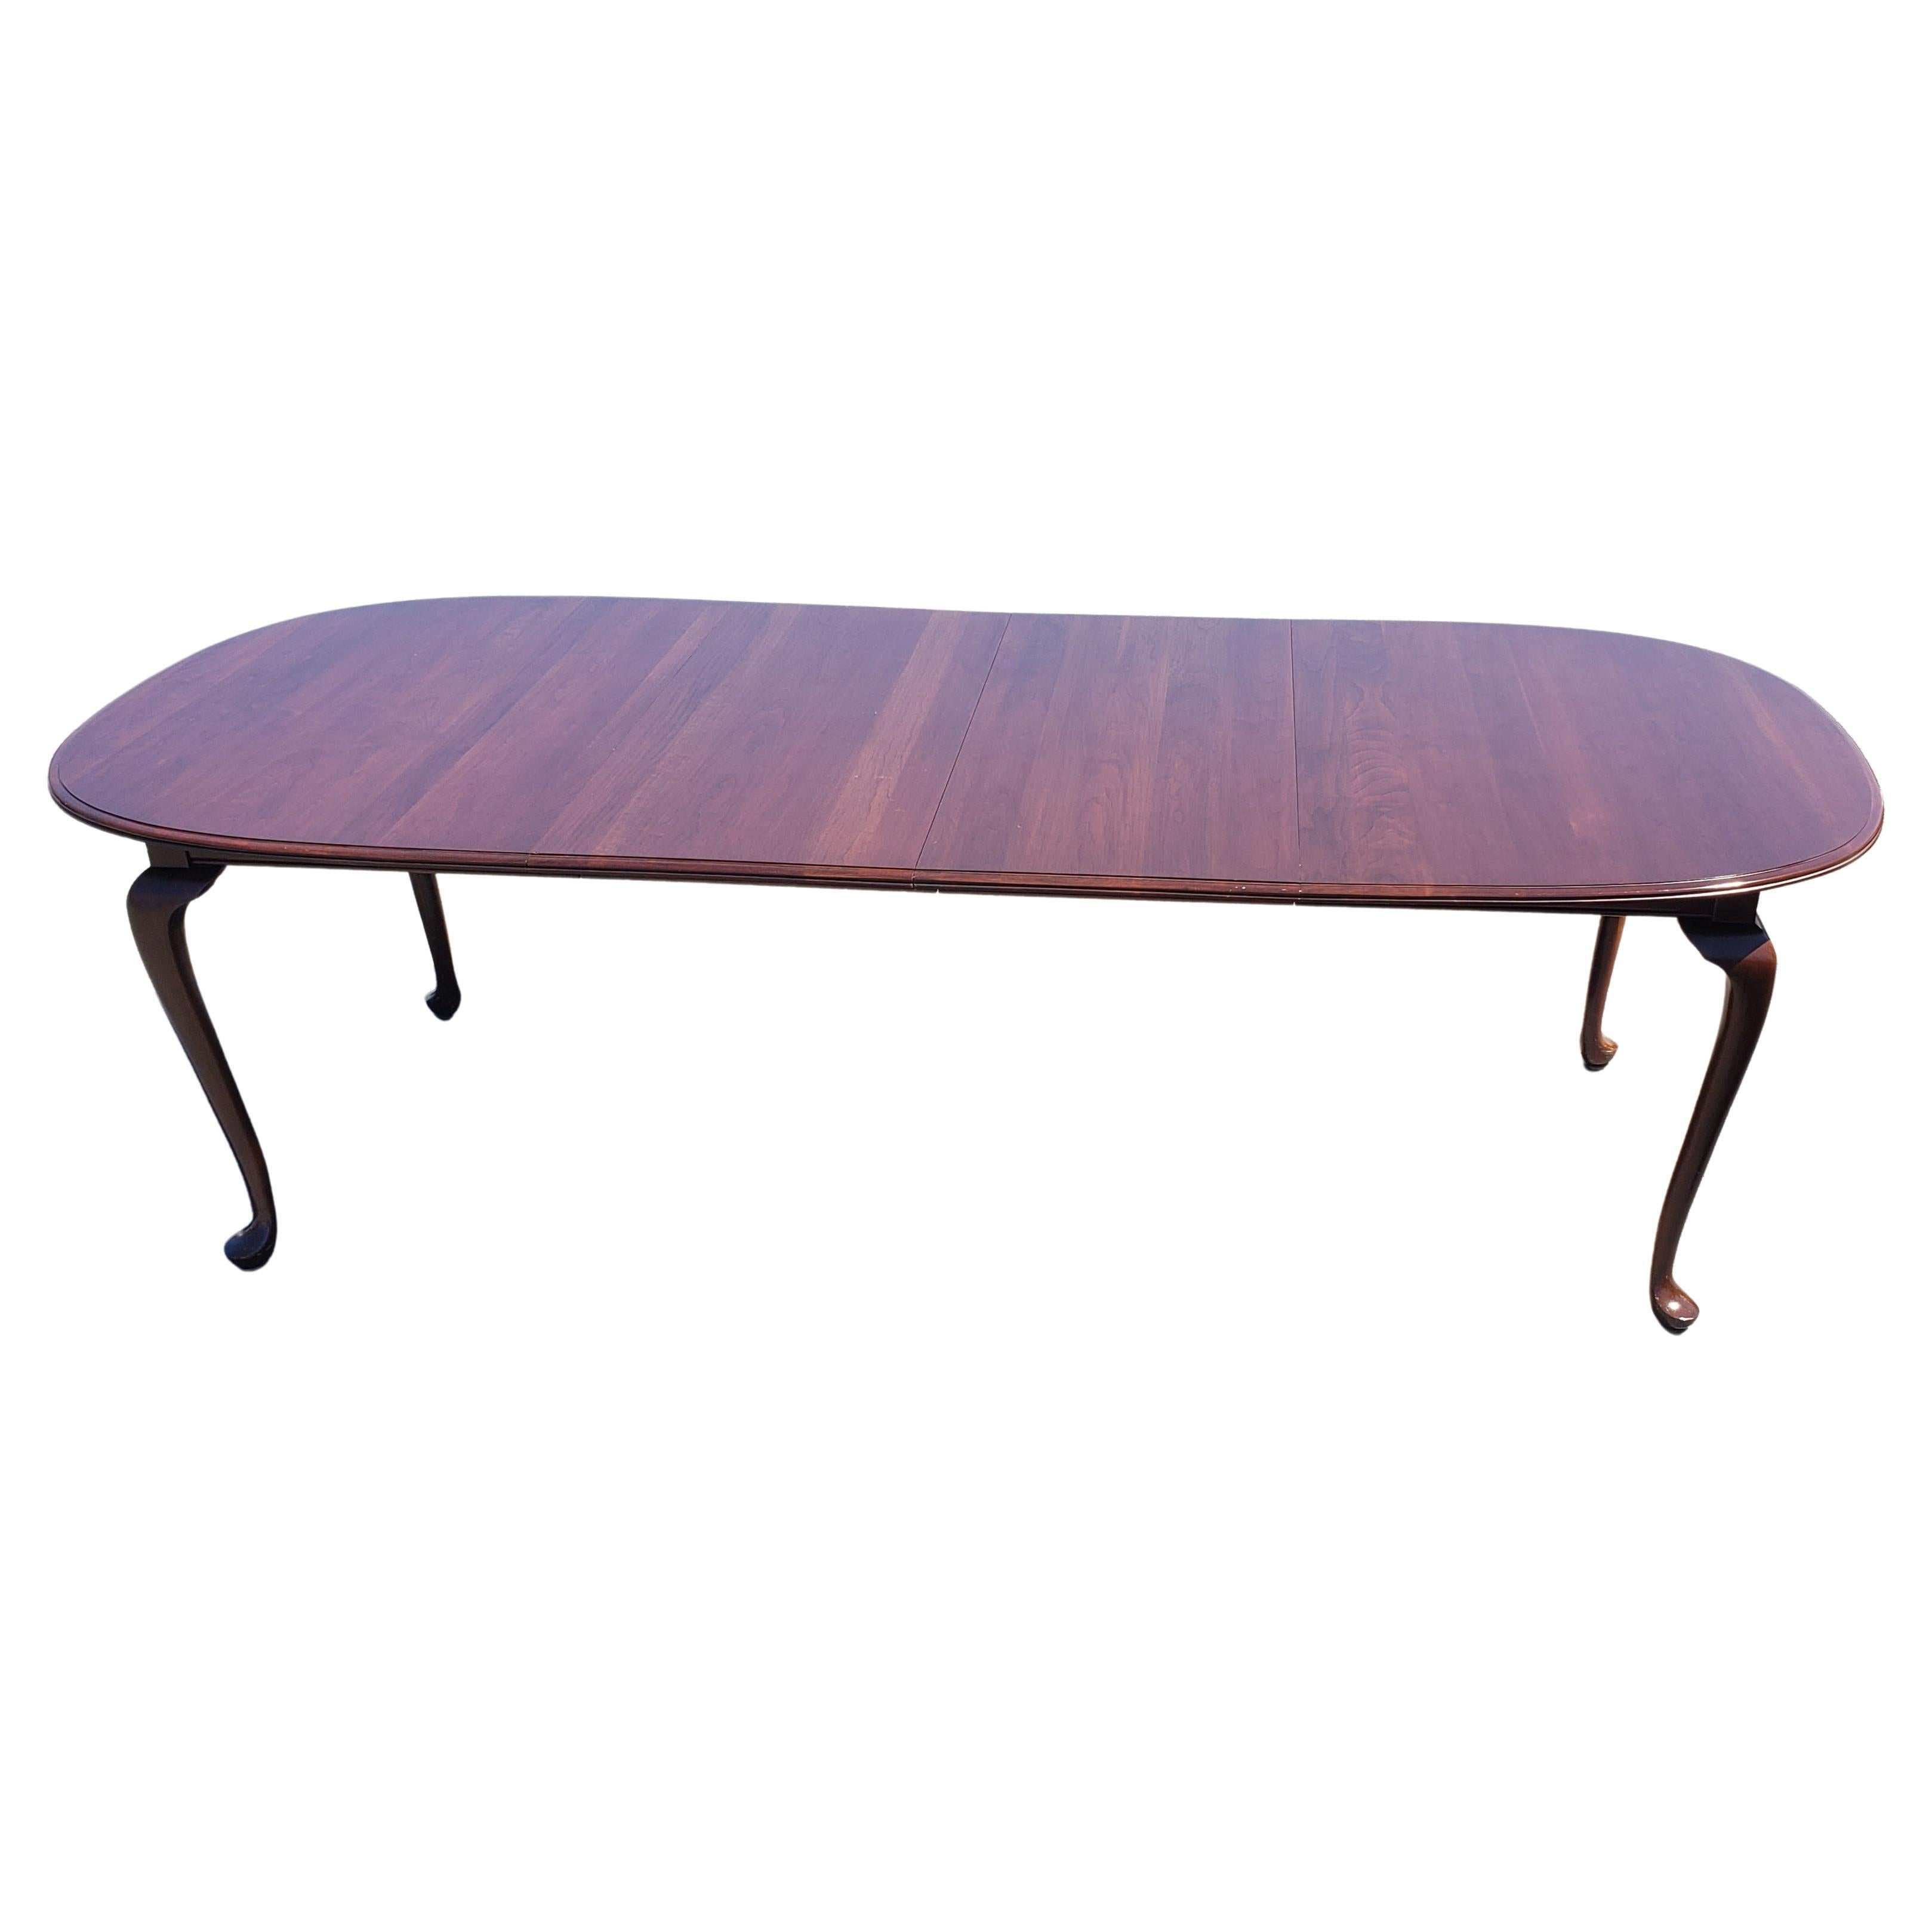 American Ethan Allen Solid Cherry Extension Dining Room Table